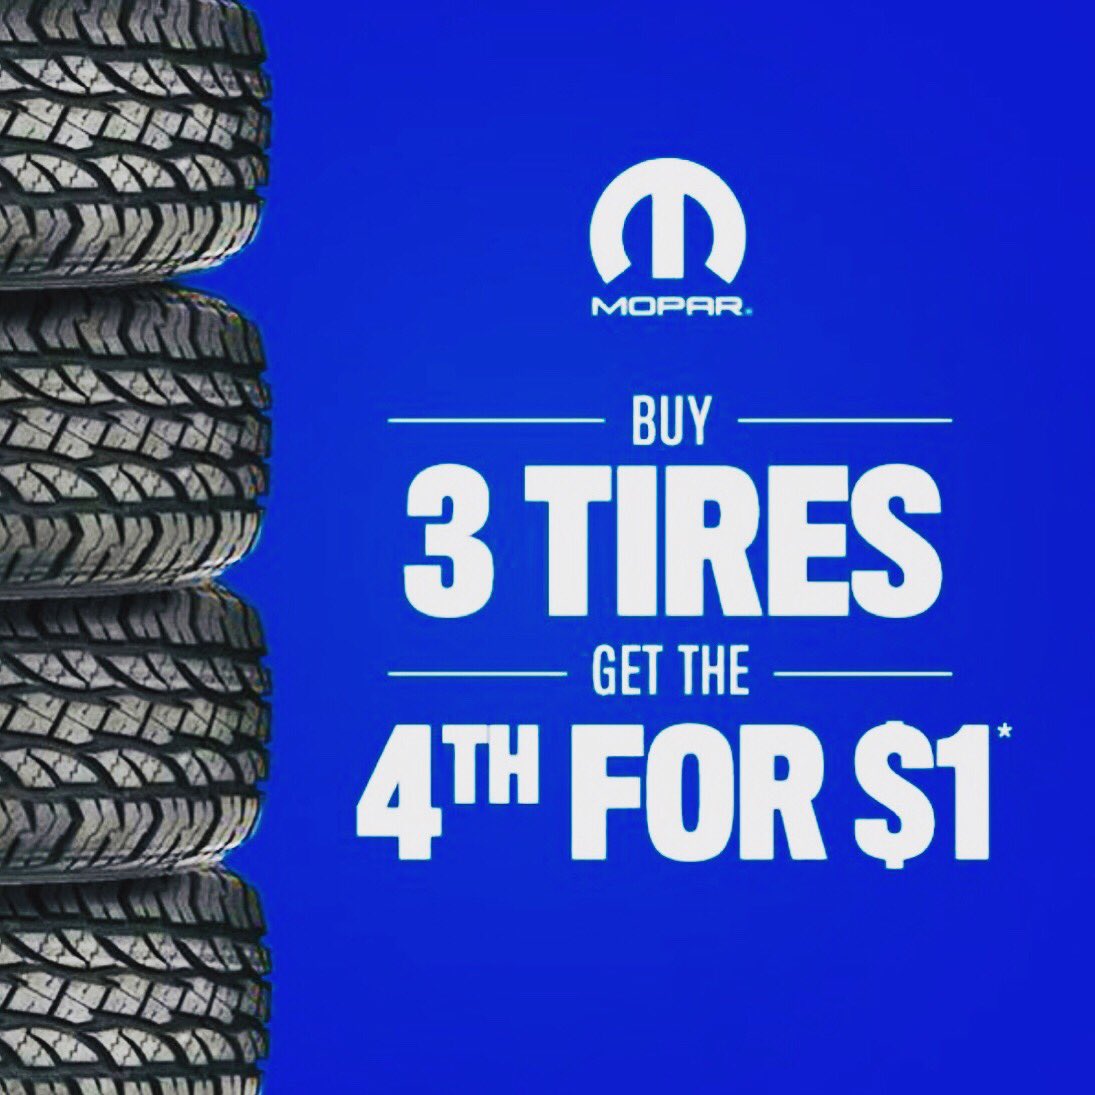 If you need new tires we can HELP!!Now through the end of November, if you purchase 3 tires (reg. price) you get the 4th tire for $1!!! Call and talk to Dennis today for details! 989-743-6331